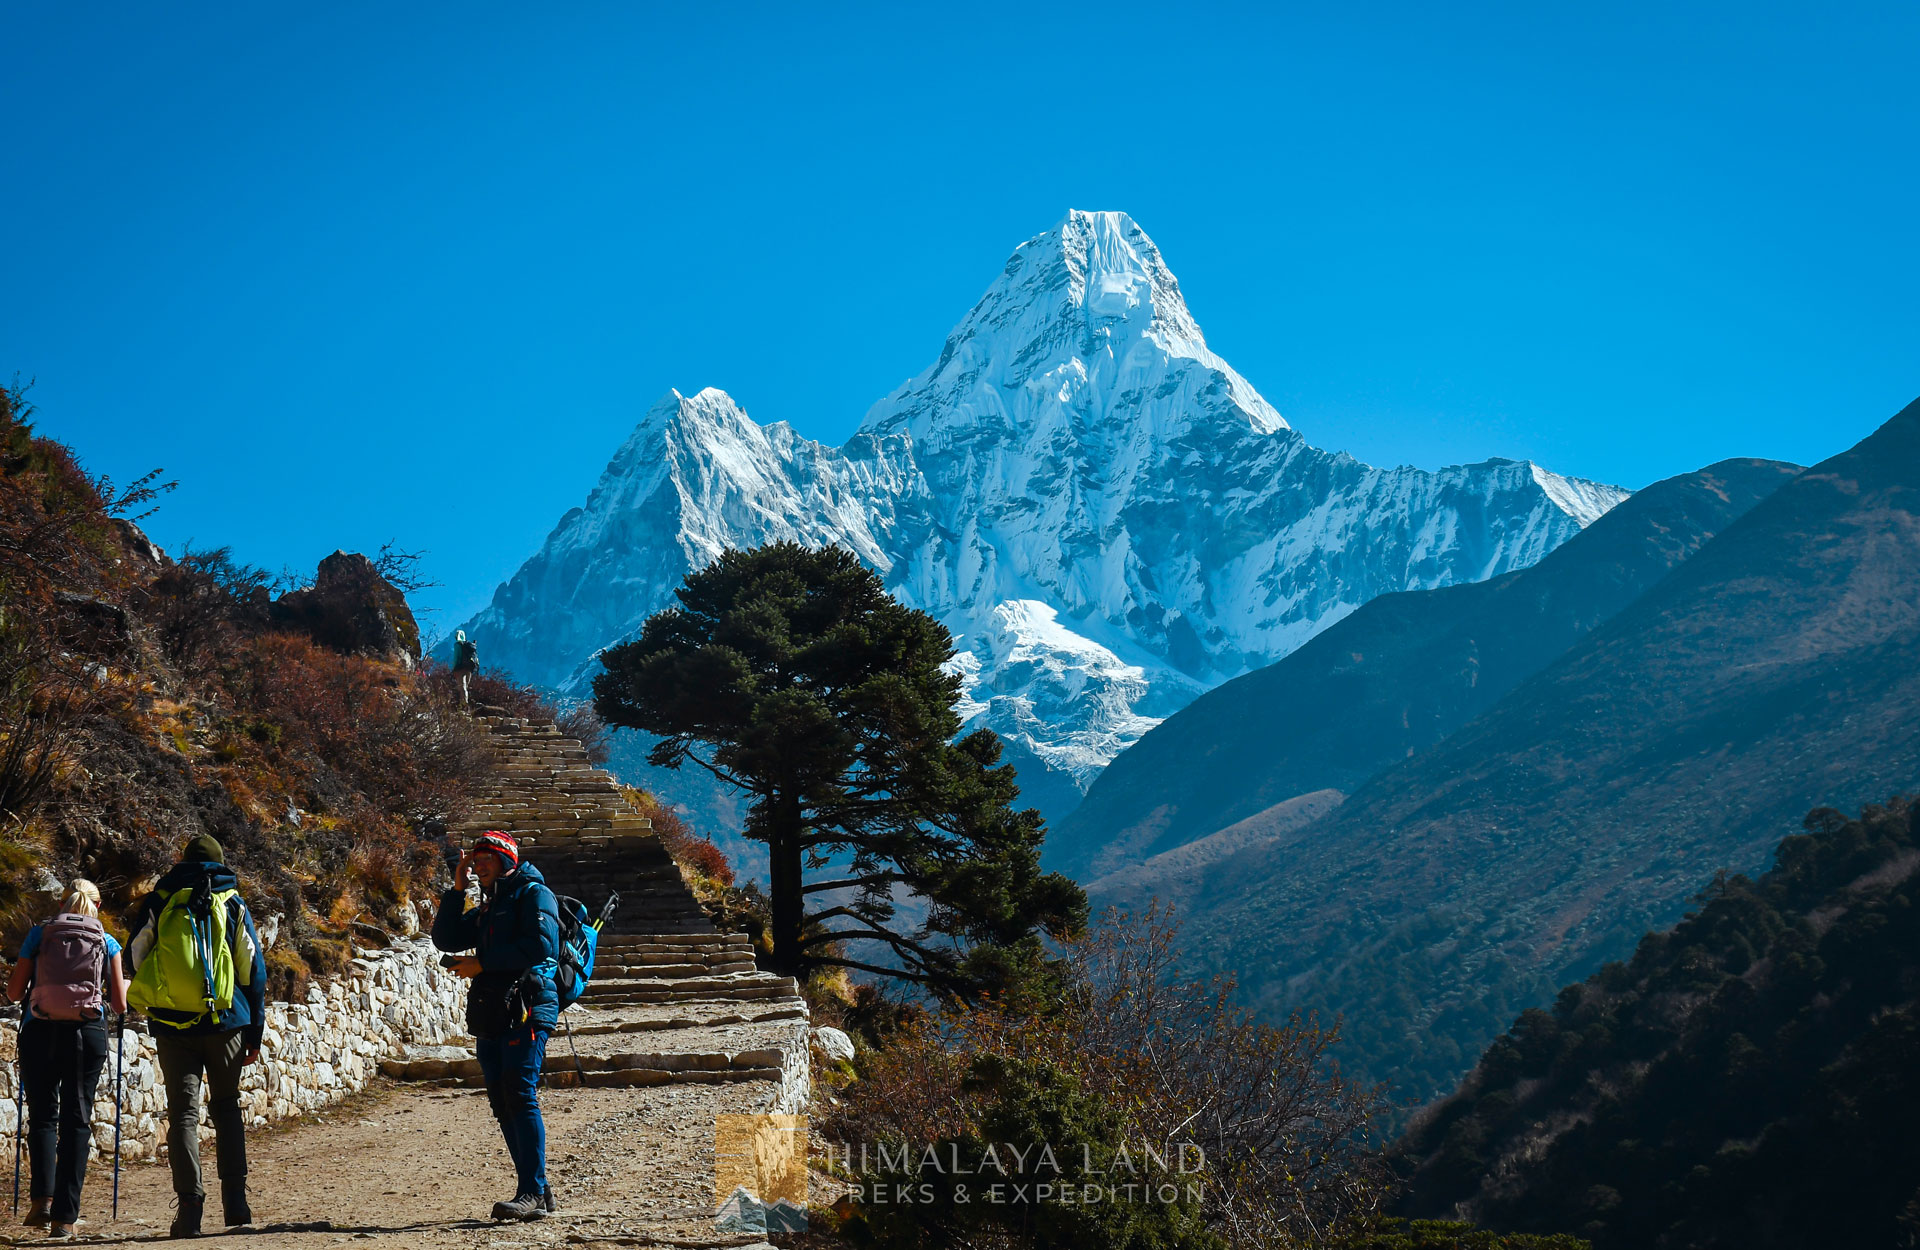 Capture the breathtaking beauty of Ama Dablam, the jewel of the Himalayas.